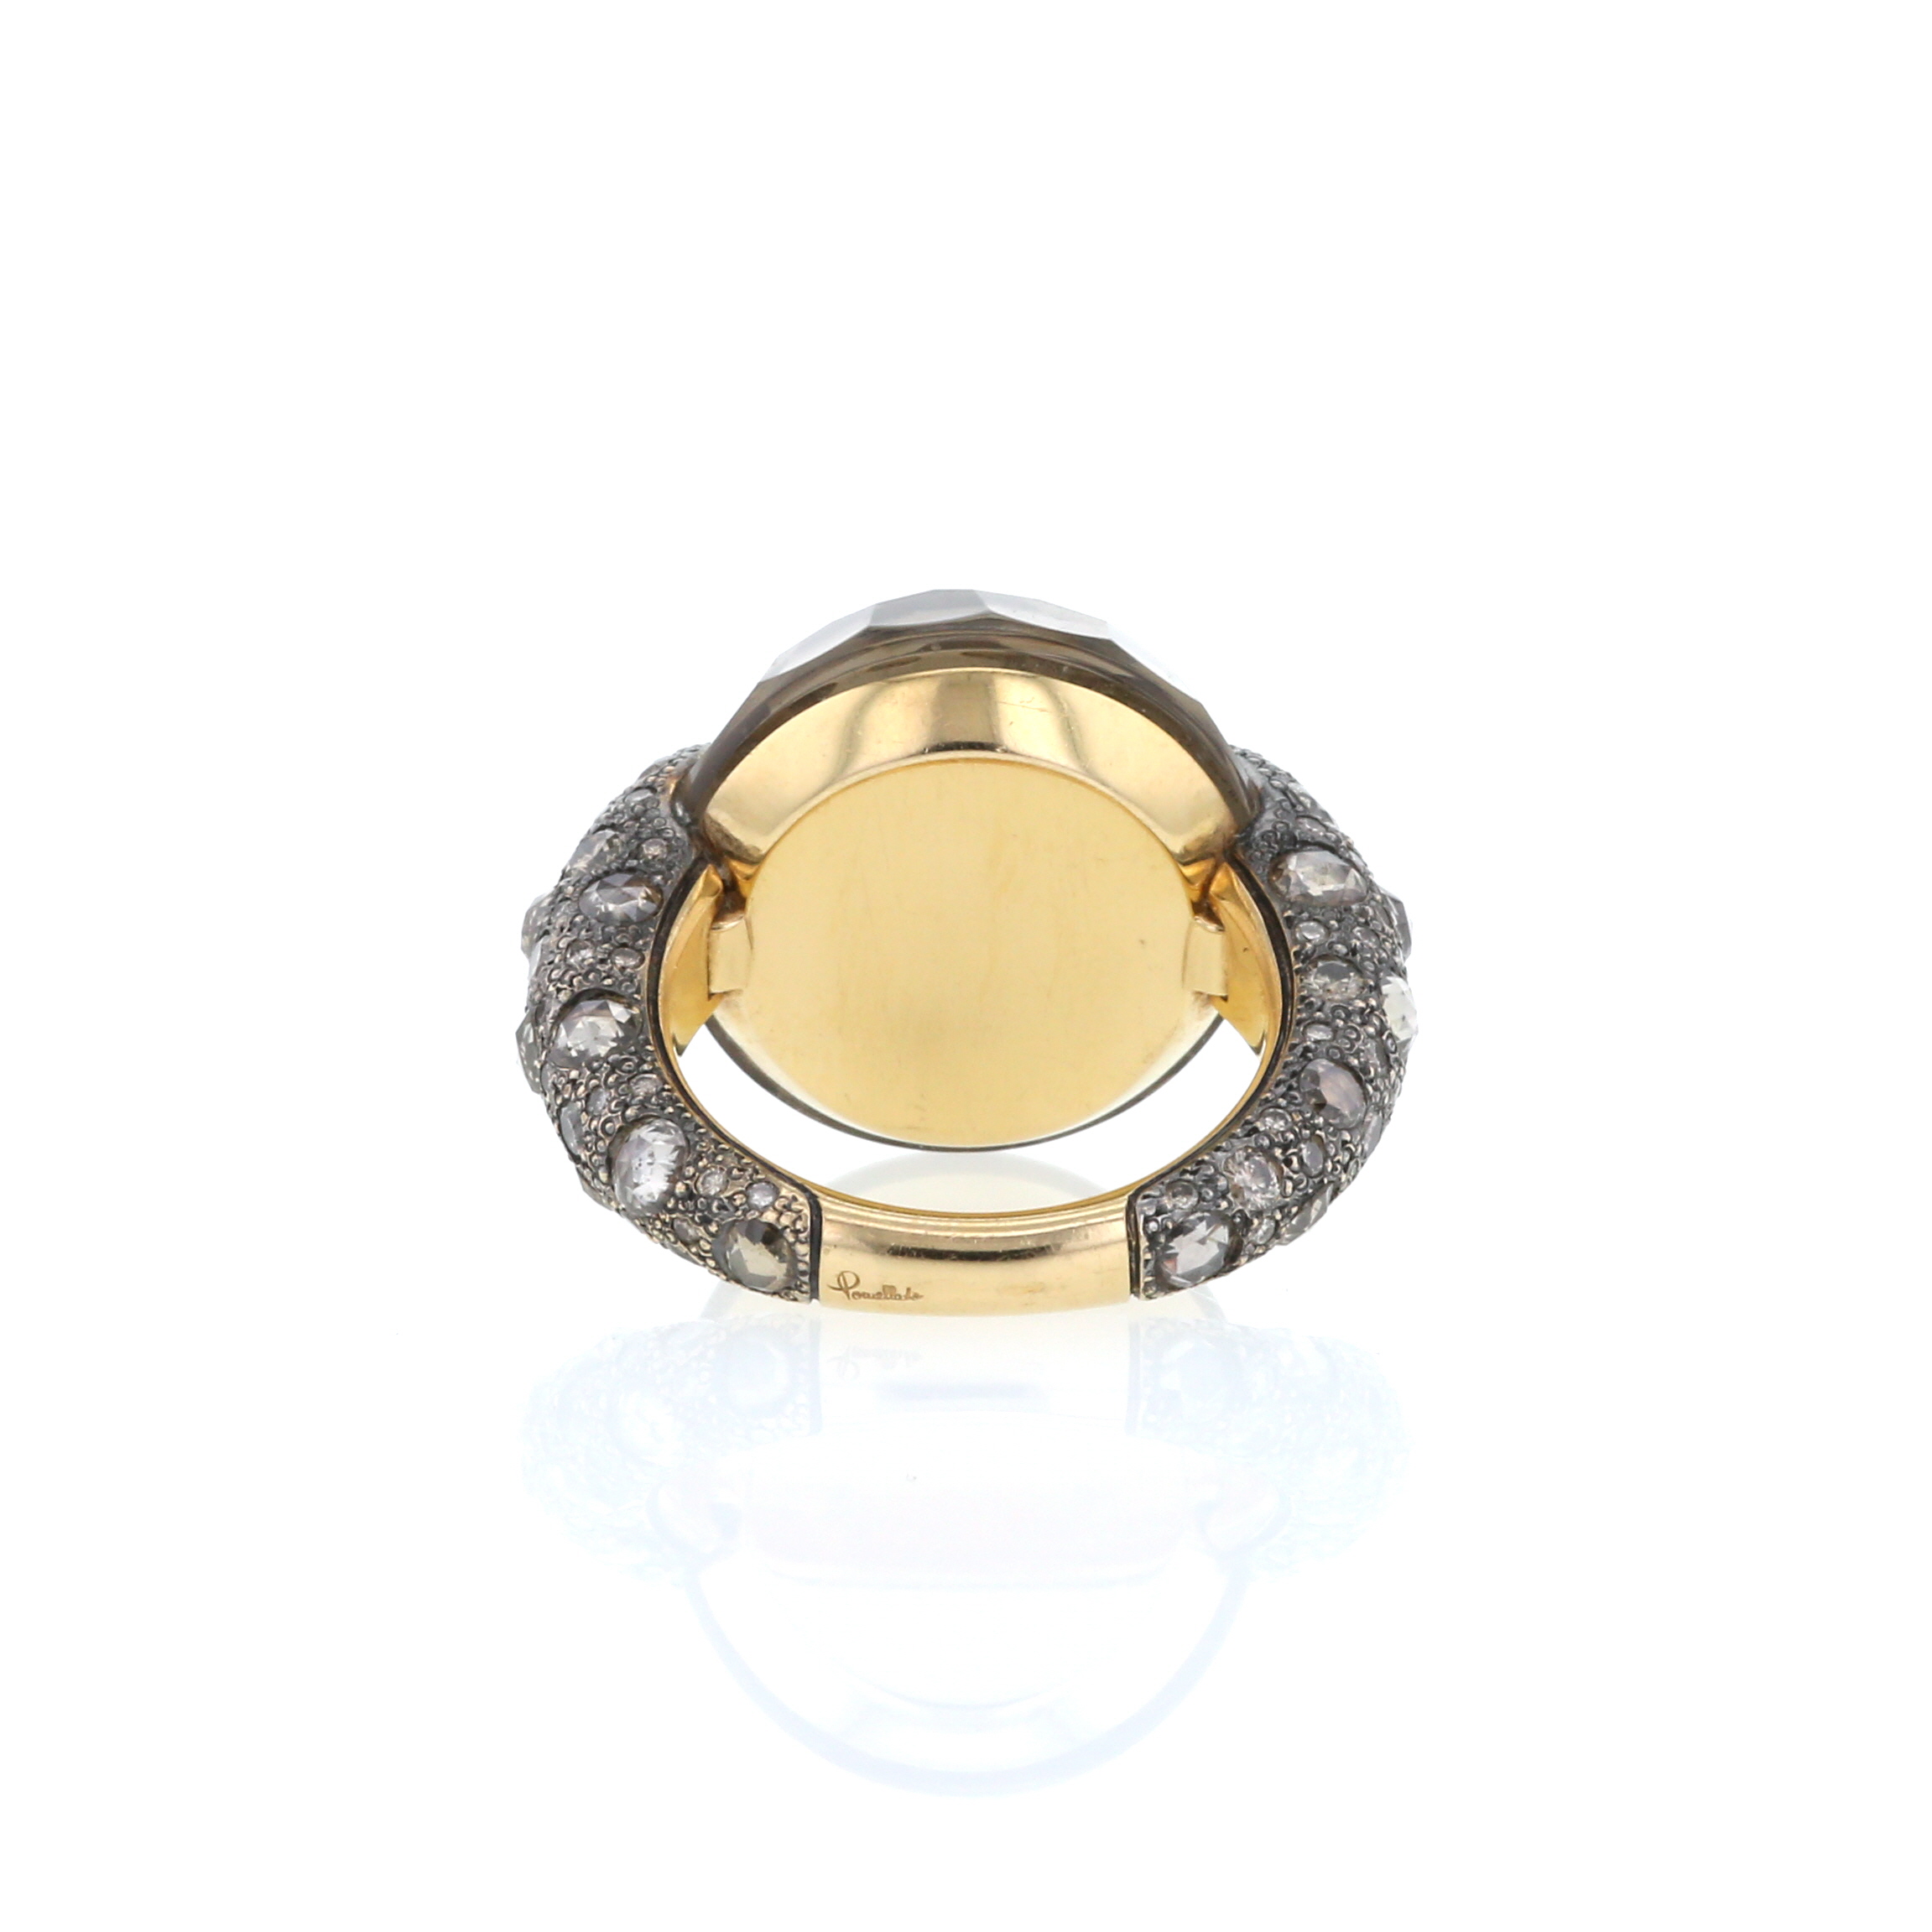 Tango Large Model Ring In Pink Gold, Diamonds And Smoked